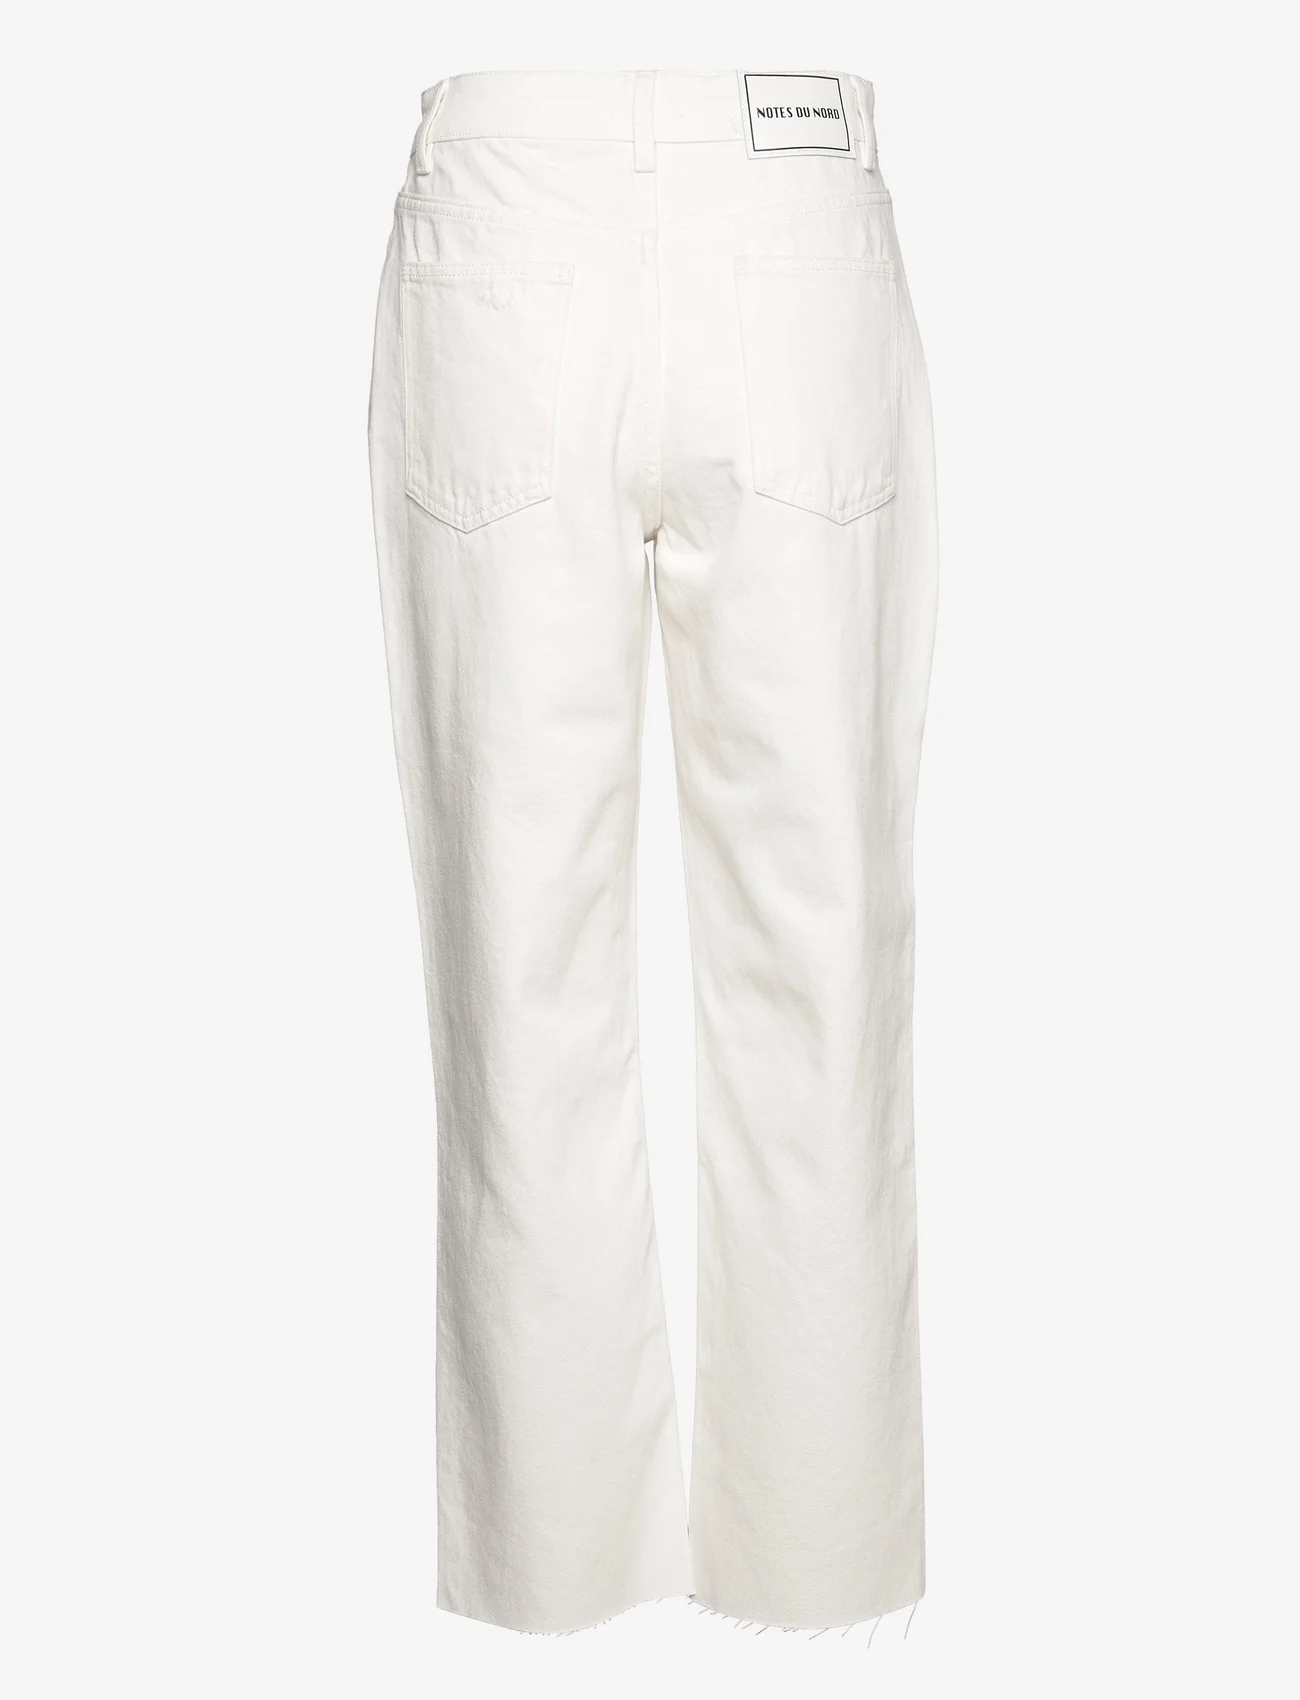 Notes du Nord - Demi Cream Jeans - tapered jeans - cream - 1